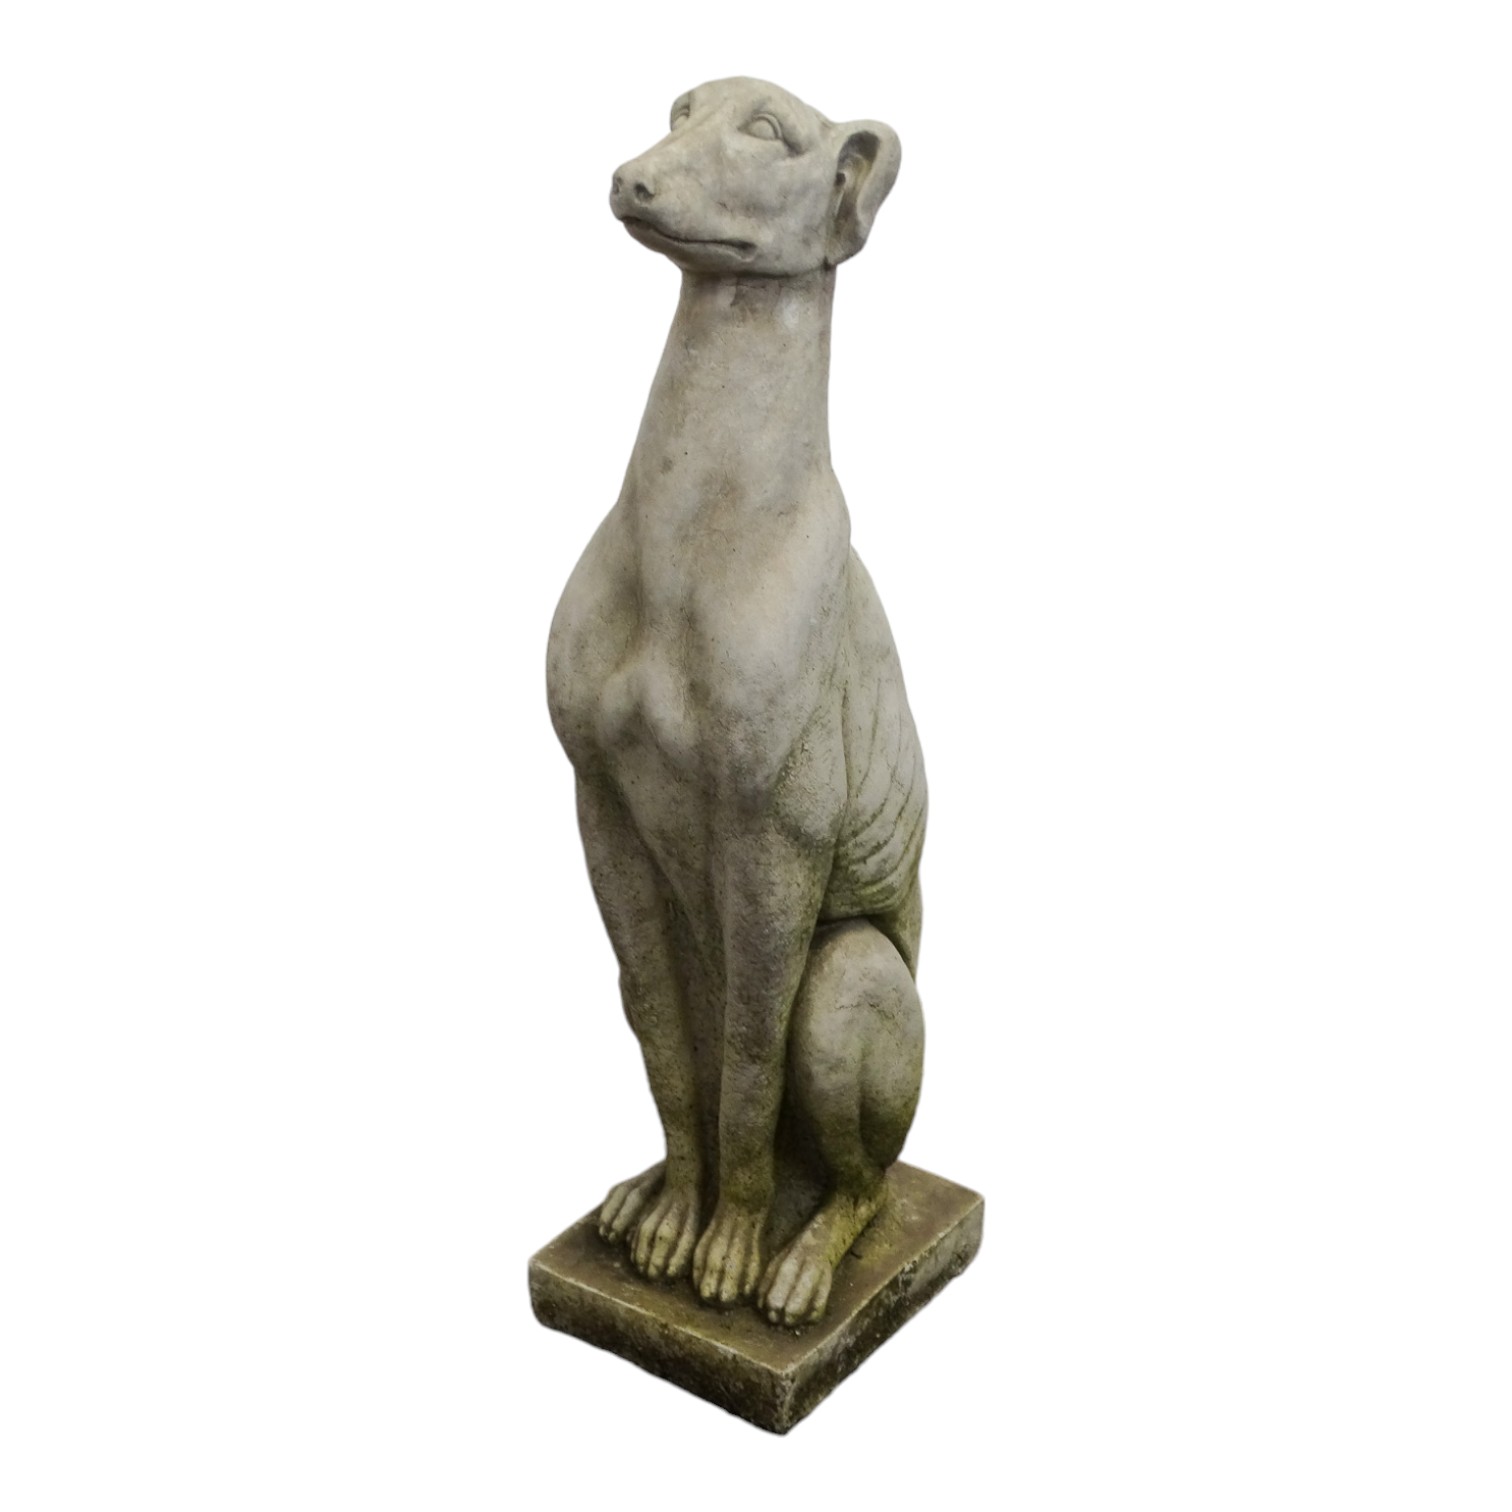 Pair of reconstituted stone dogs - seated alert pose, 55cm high - Image 2 of 10